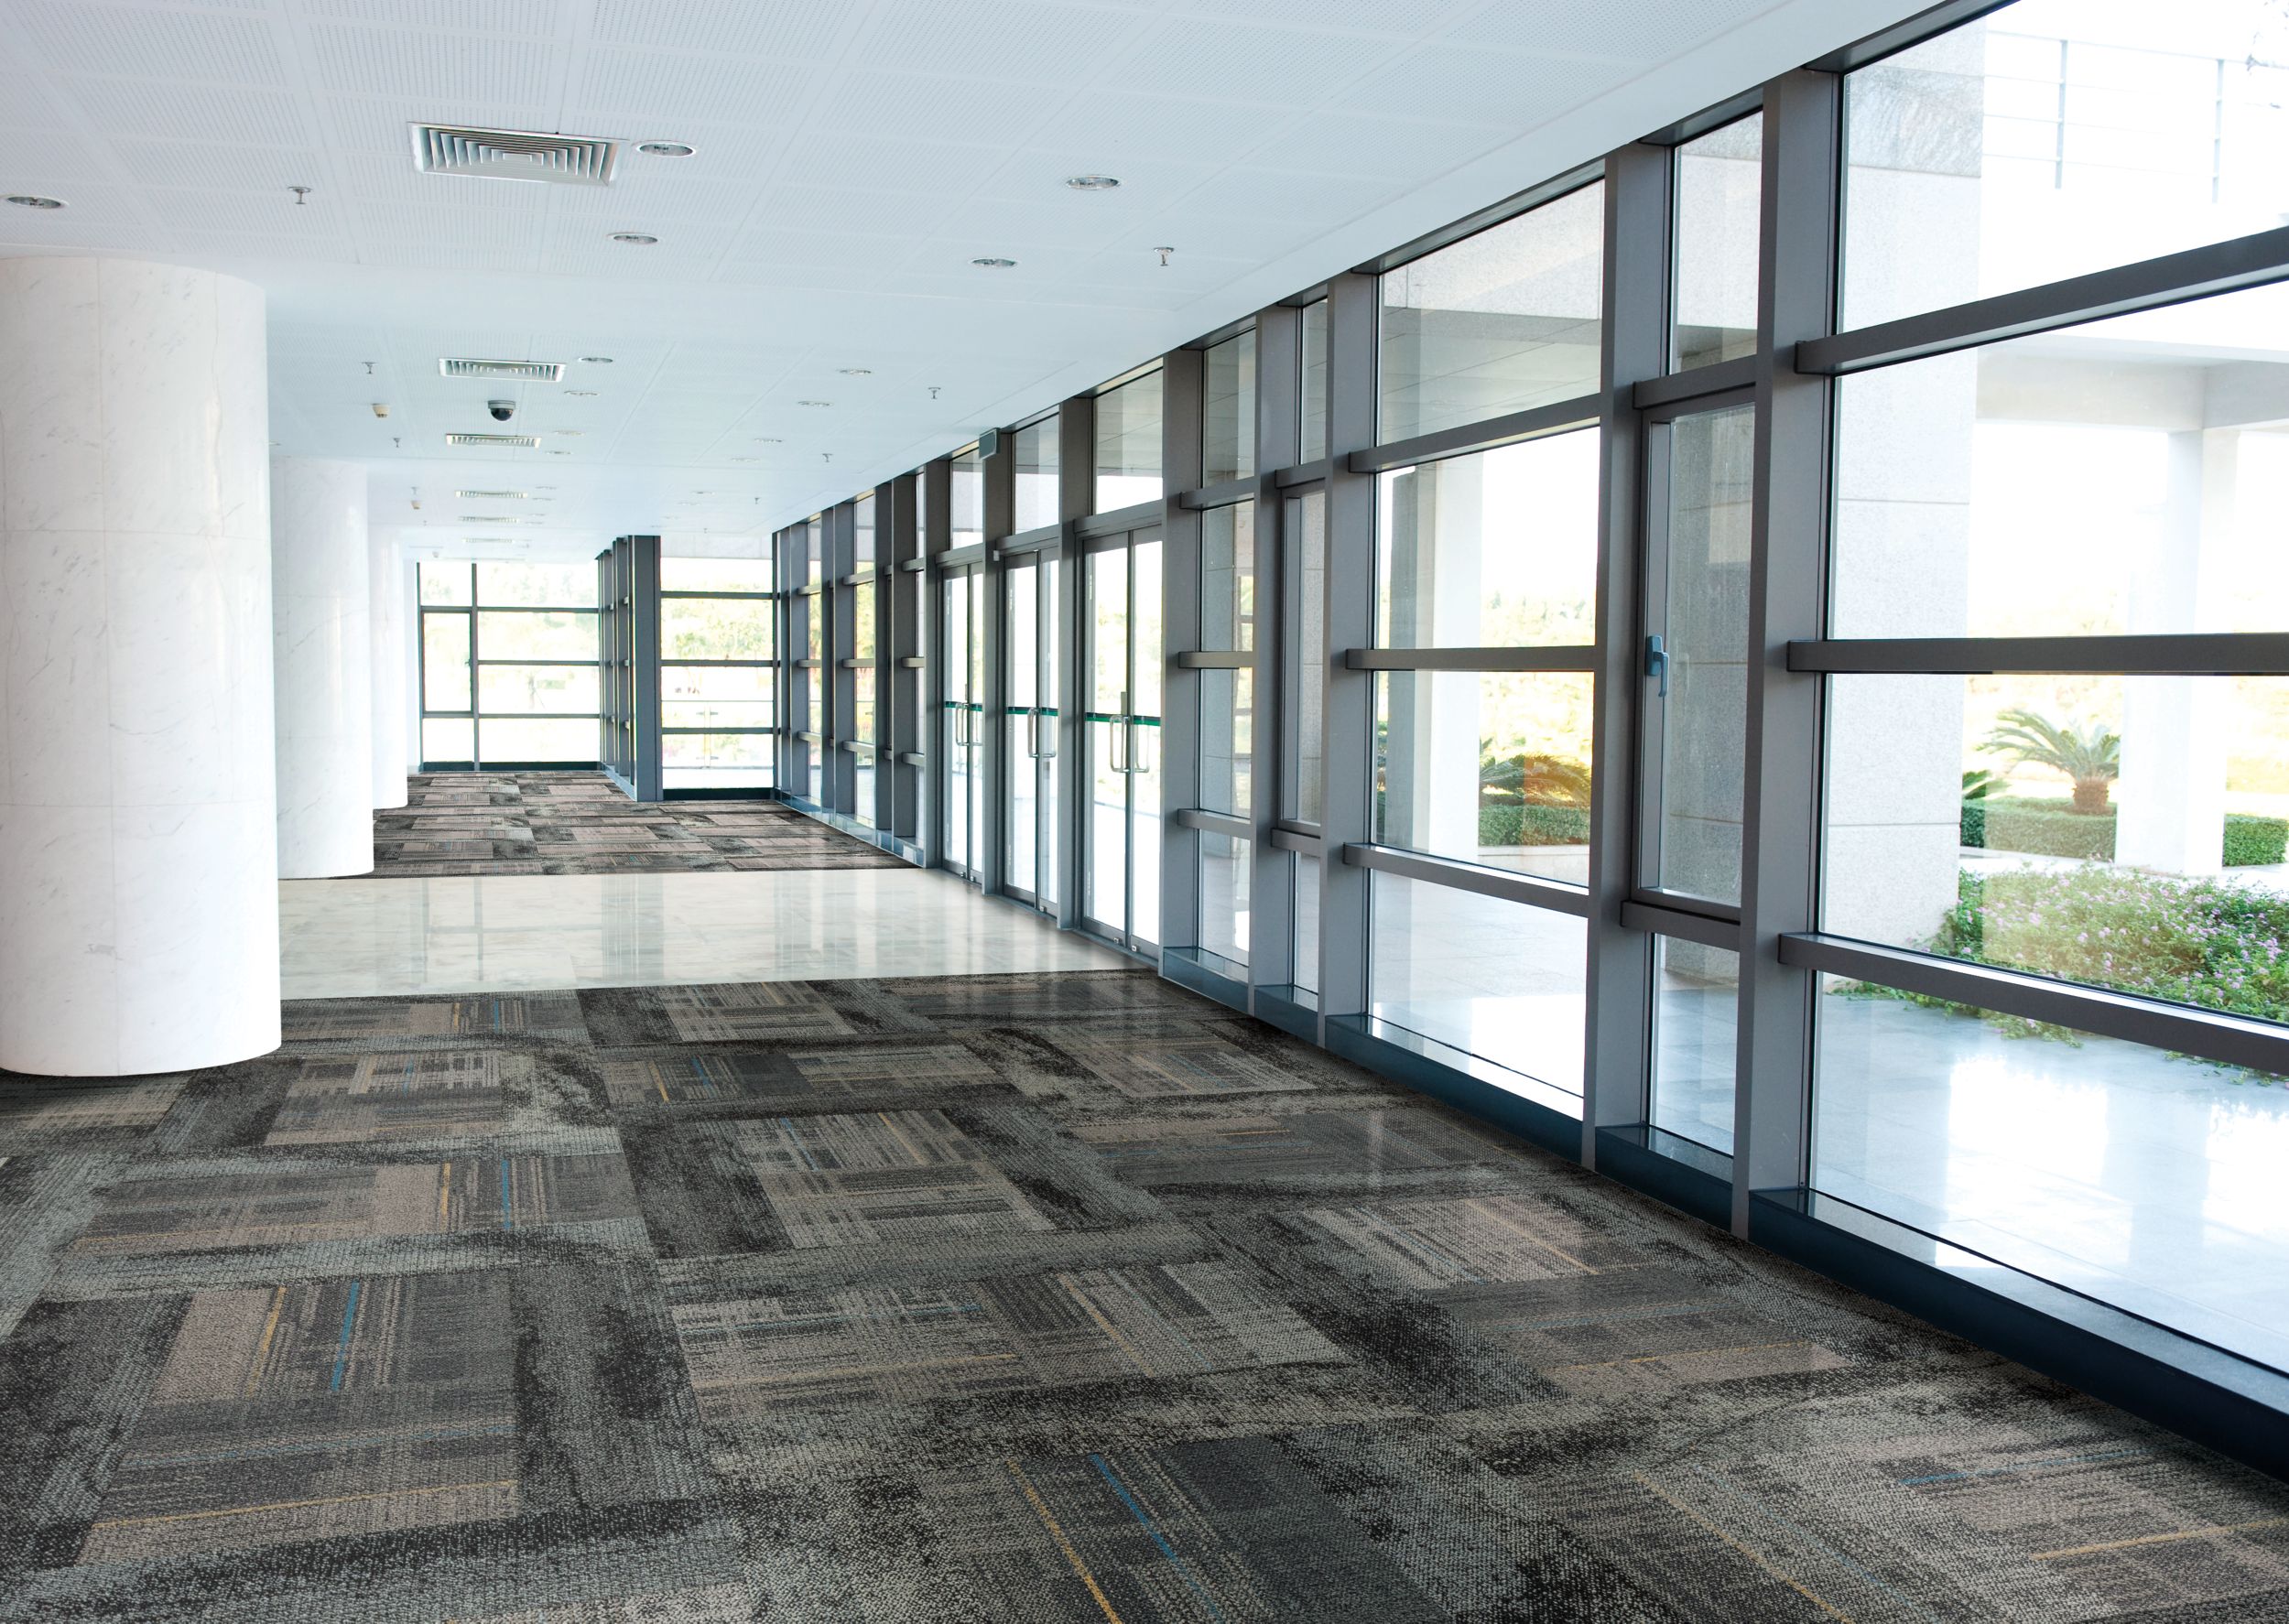 Interface AE312 carpet tile with Neighborhood Smooth plank carpet tile and Interface Textured Stones LVT in corridor with glass walls imagen número 9